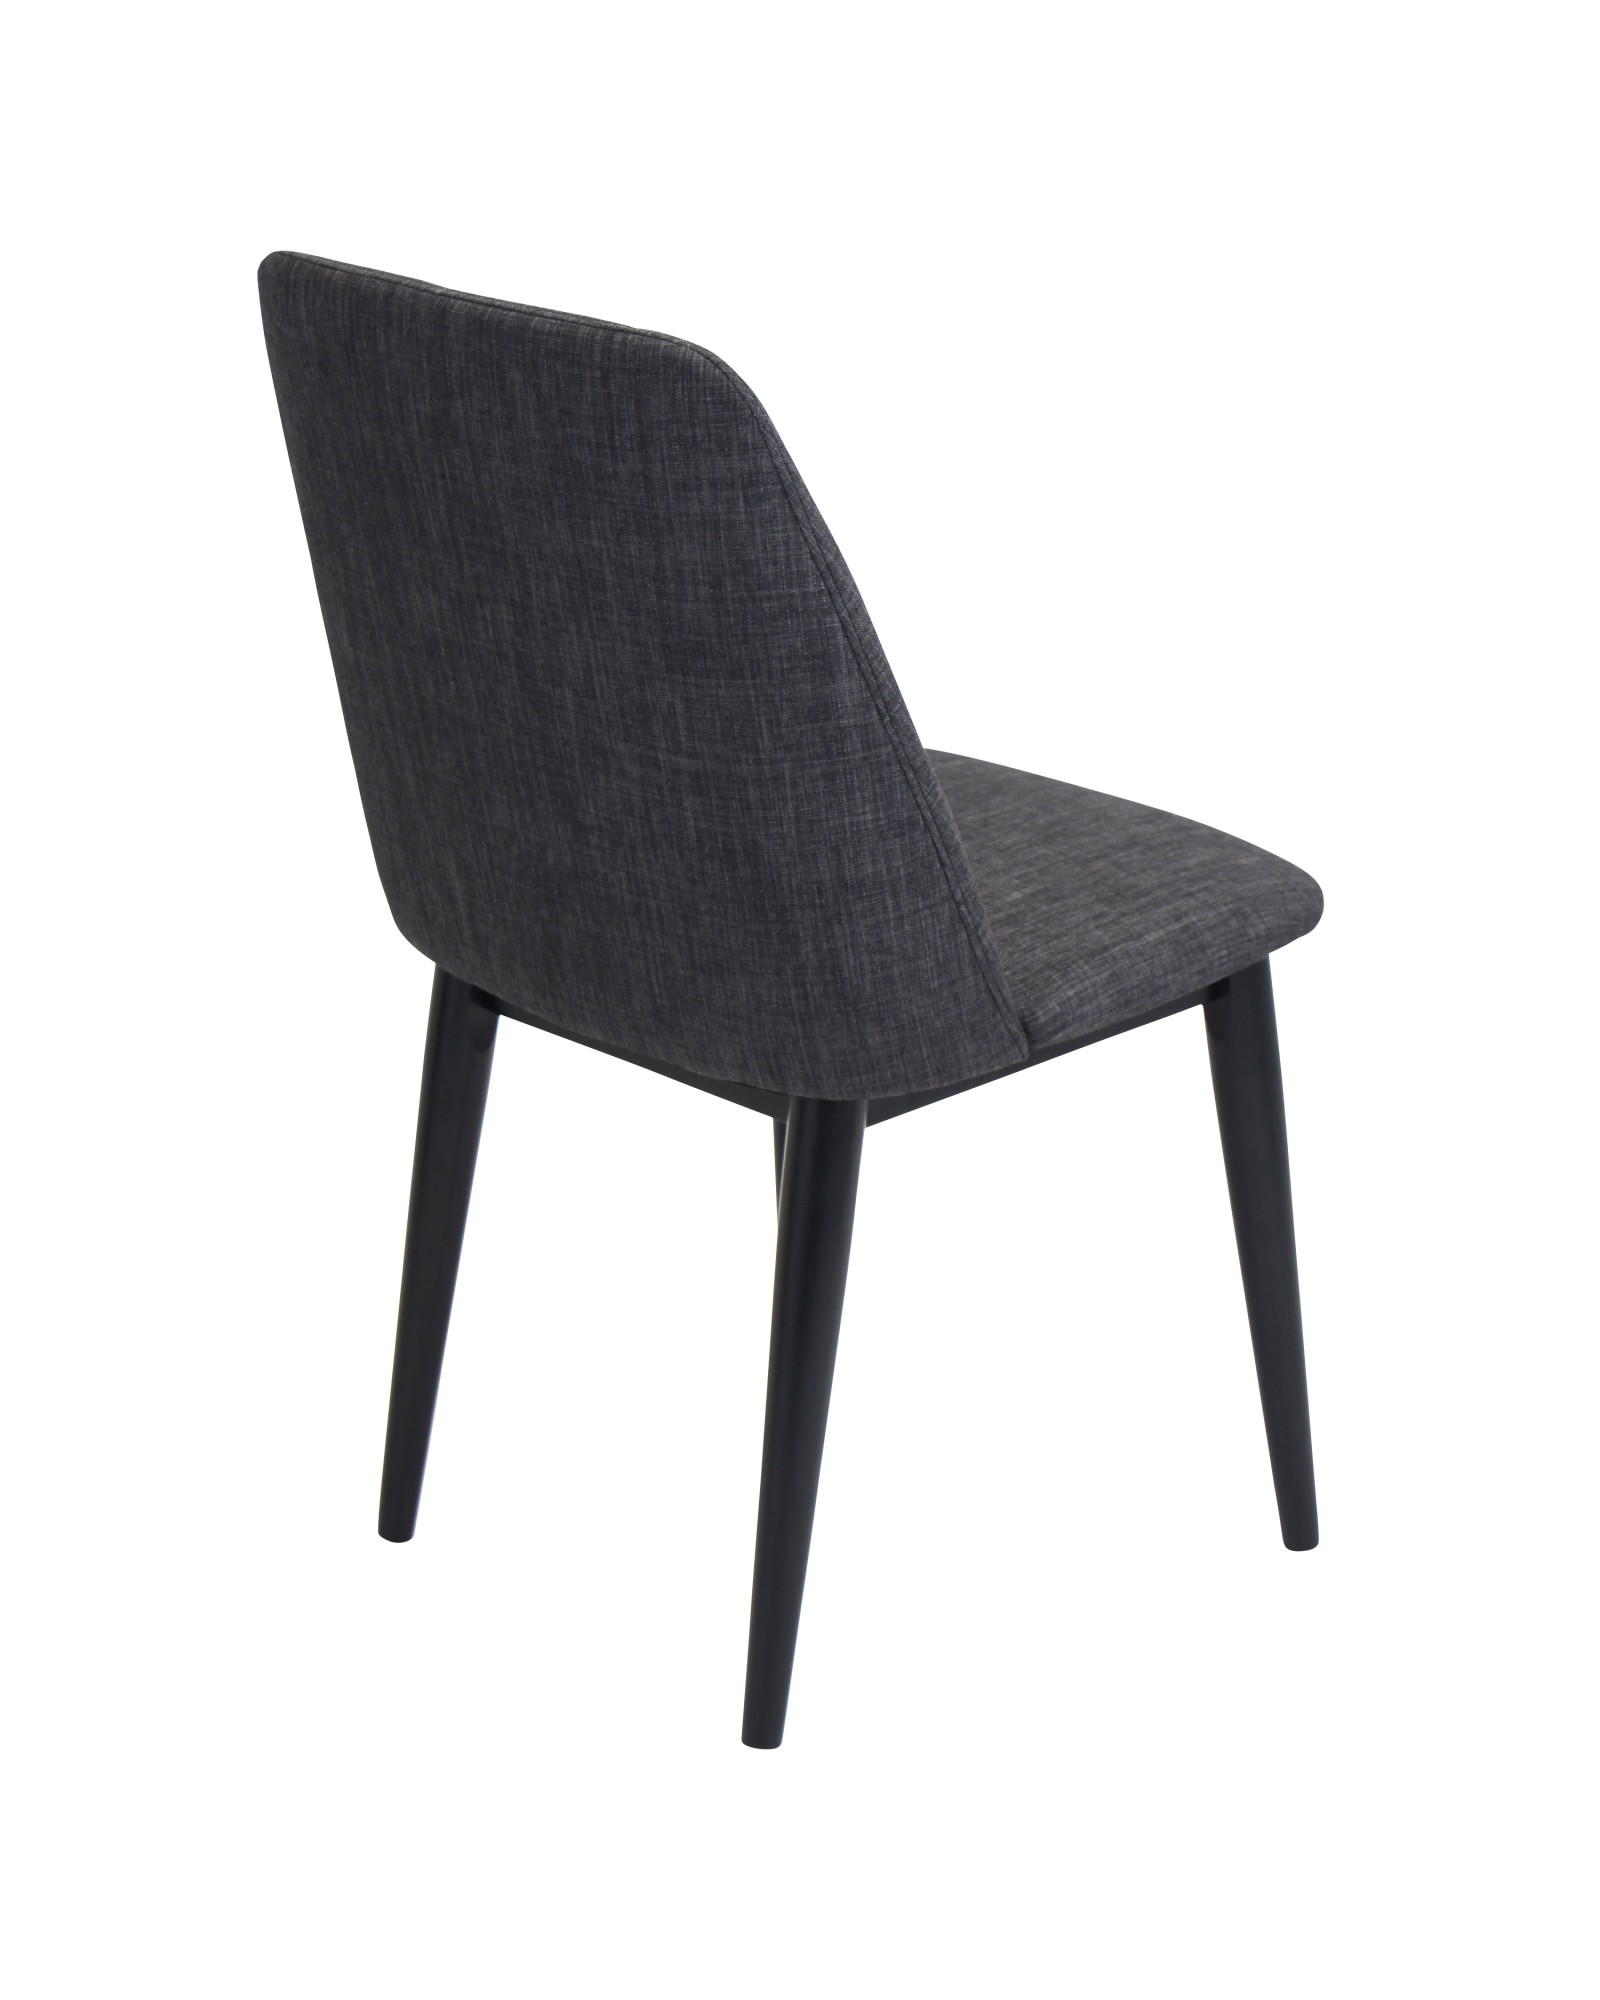 Tintori Contemporary Dining Chair in Charcoal Fabric - Set of 2